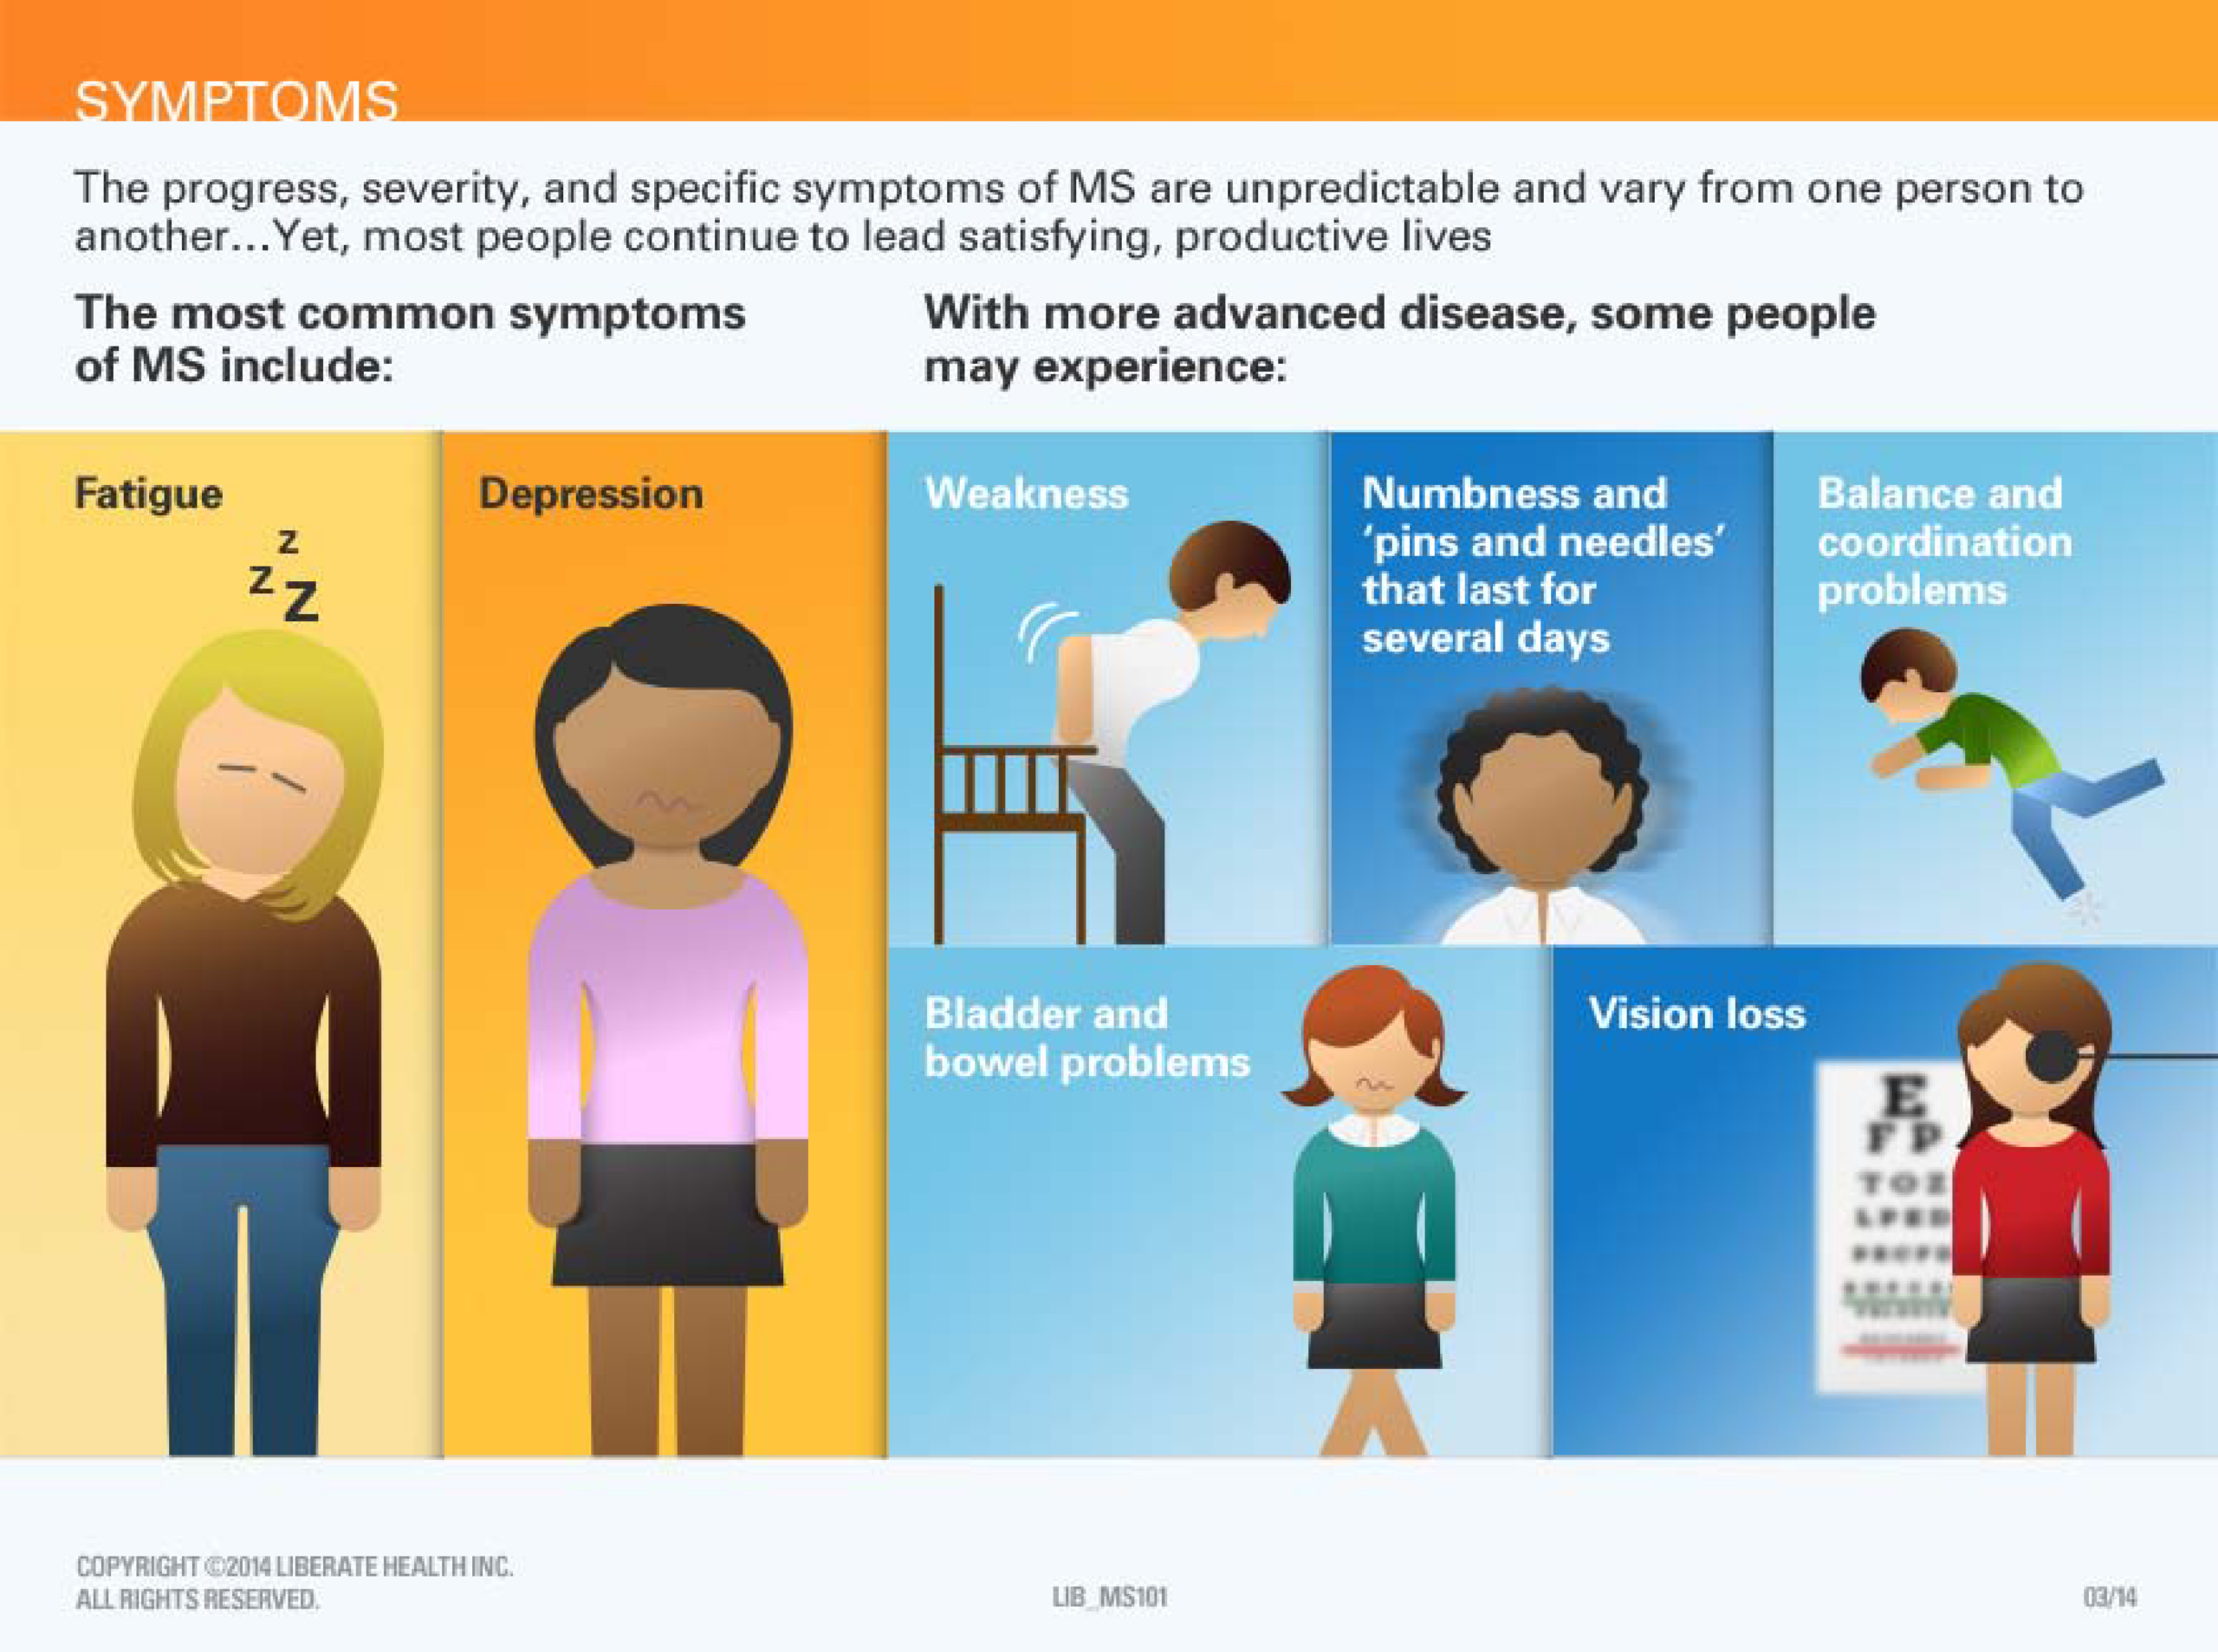 Early signs of MS: Symptoms and risk factors